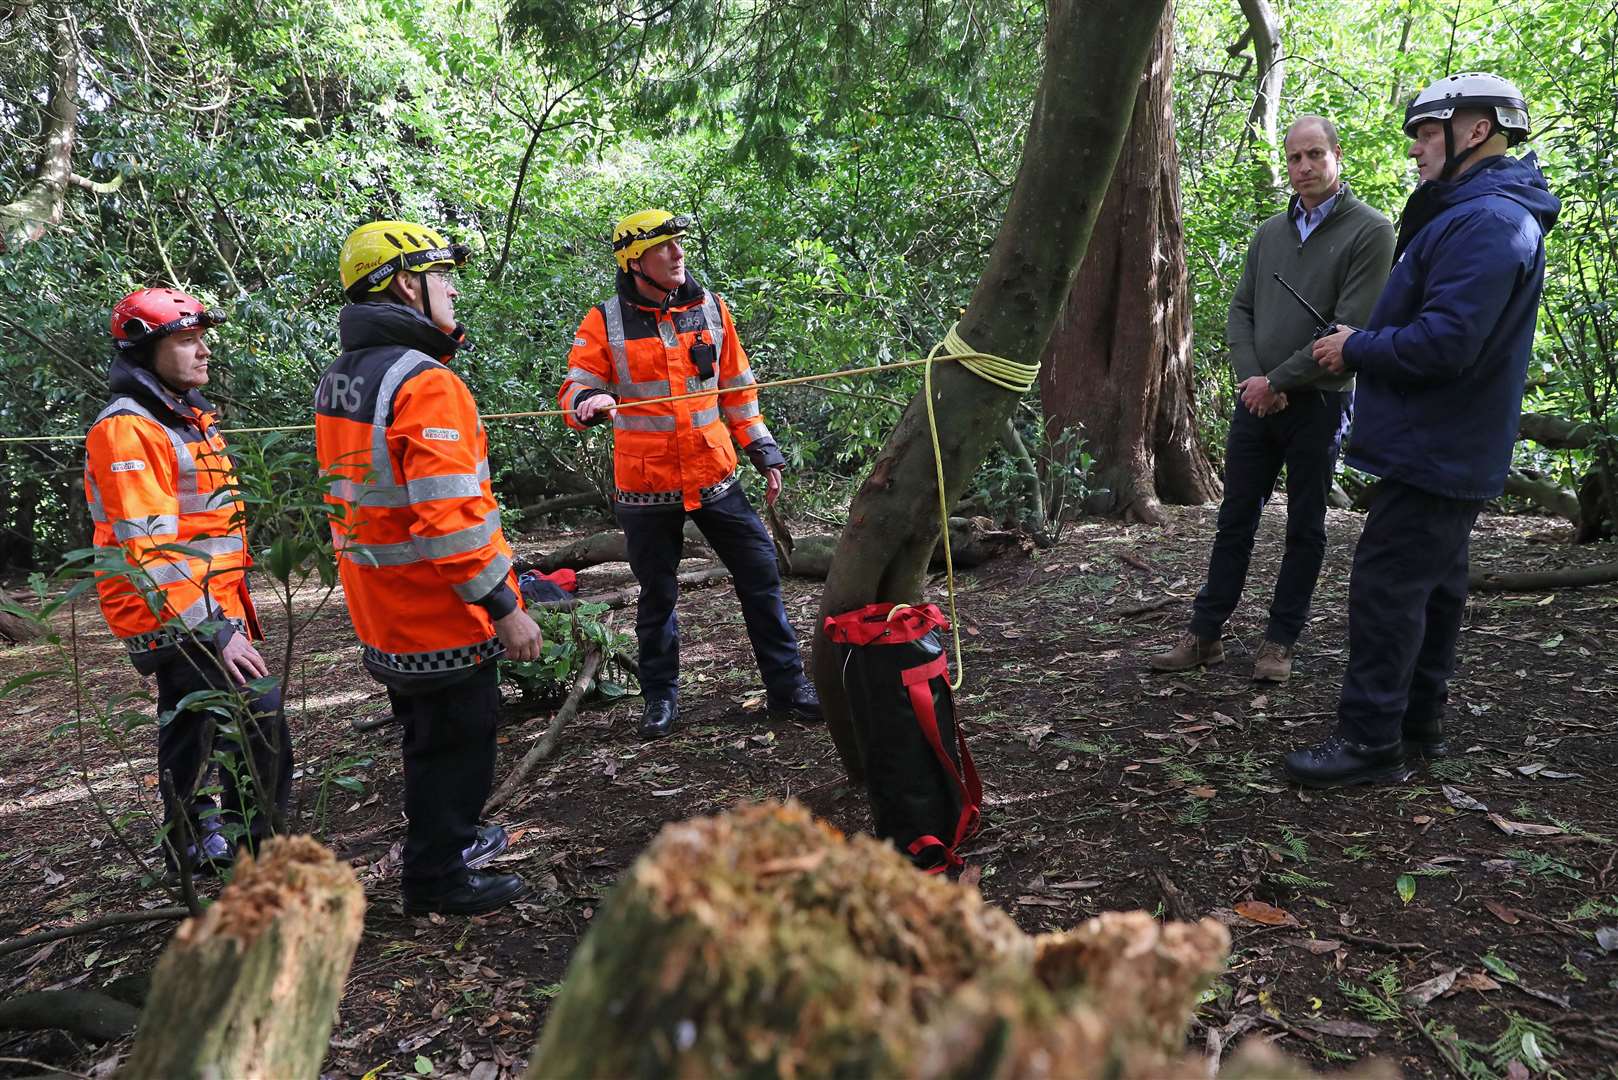 The Duke of Cambridge watches a search and rescue demonstration (PA)